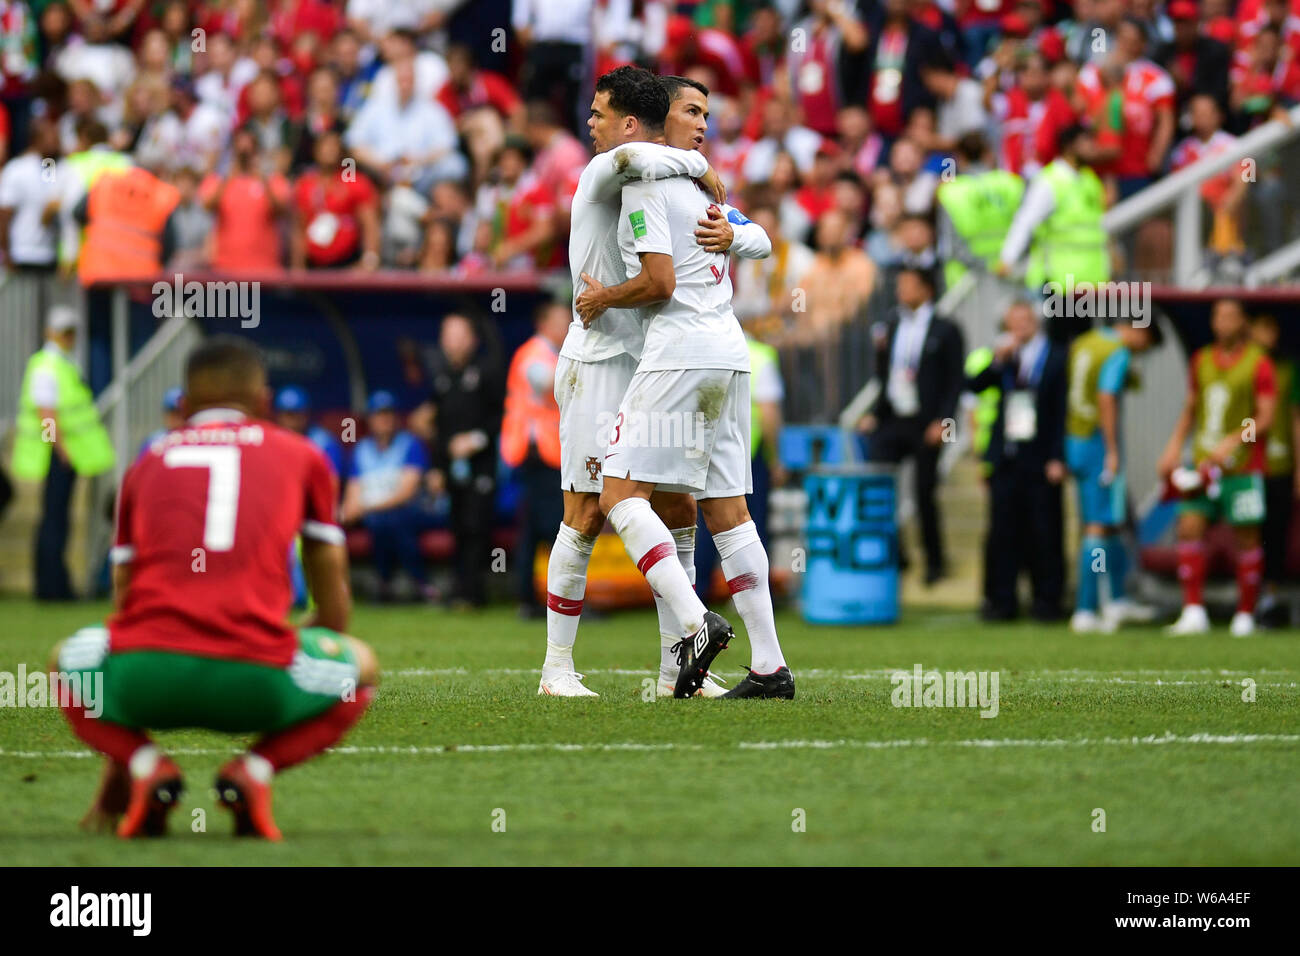 Cristiano Ronaldo of Portugal, back, celebrates with Pepe after defeating Morocco in their Group B match during the 2018 FIFA World Cup in Moscow, Rus Stock Photo